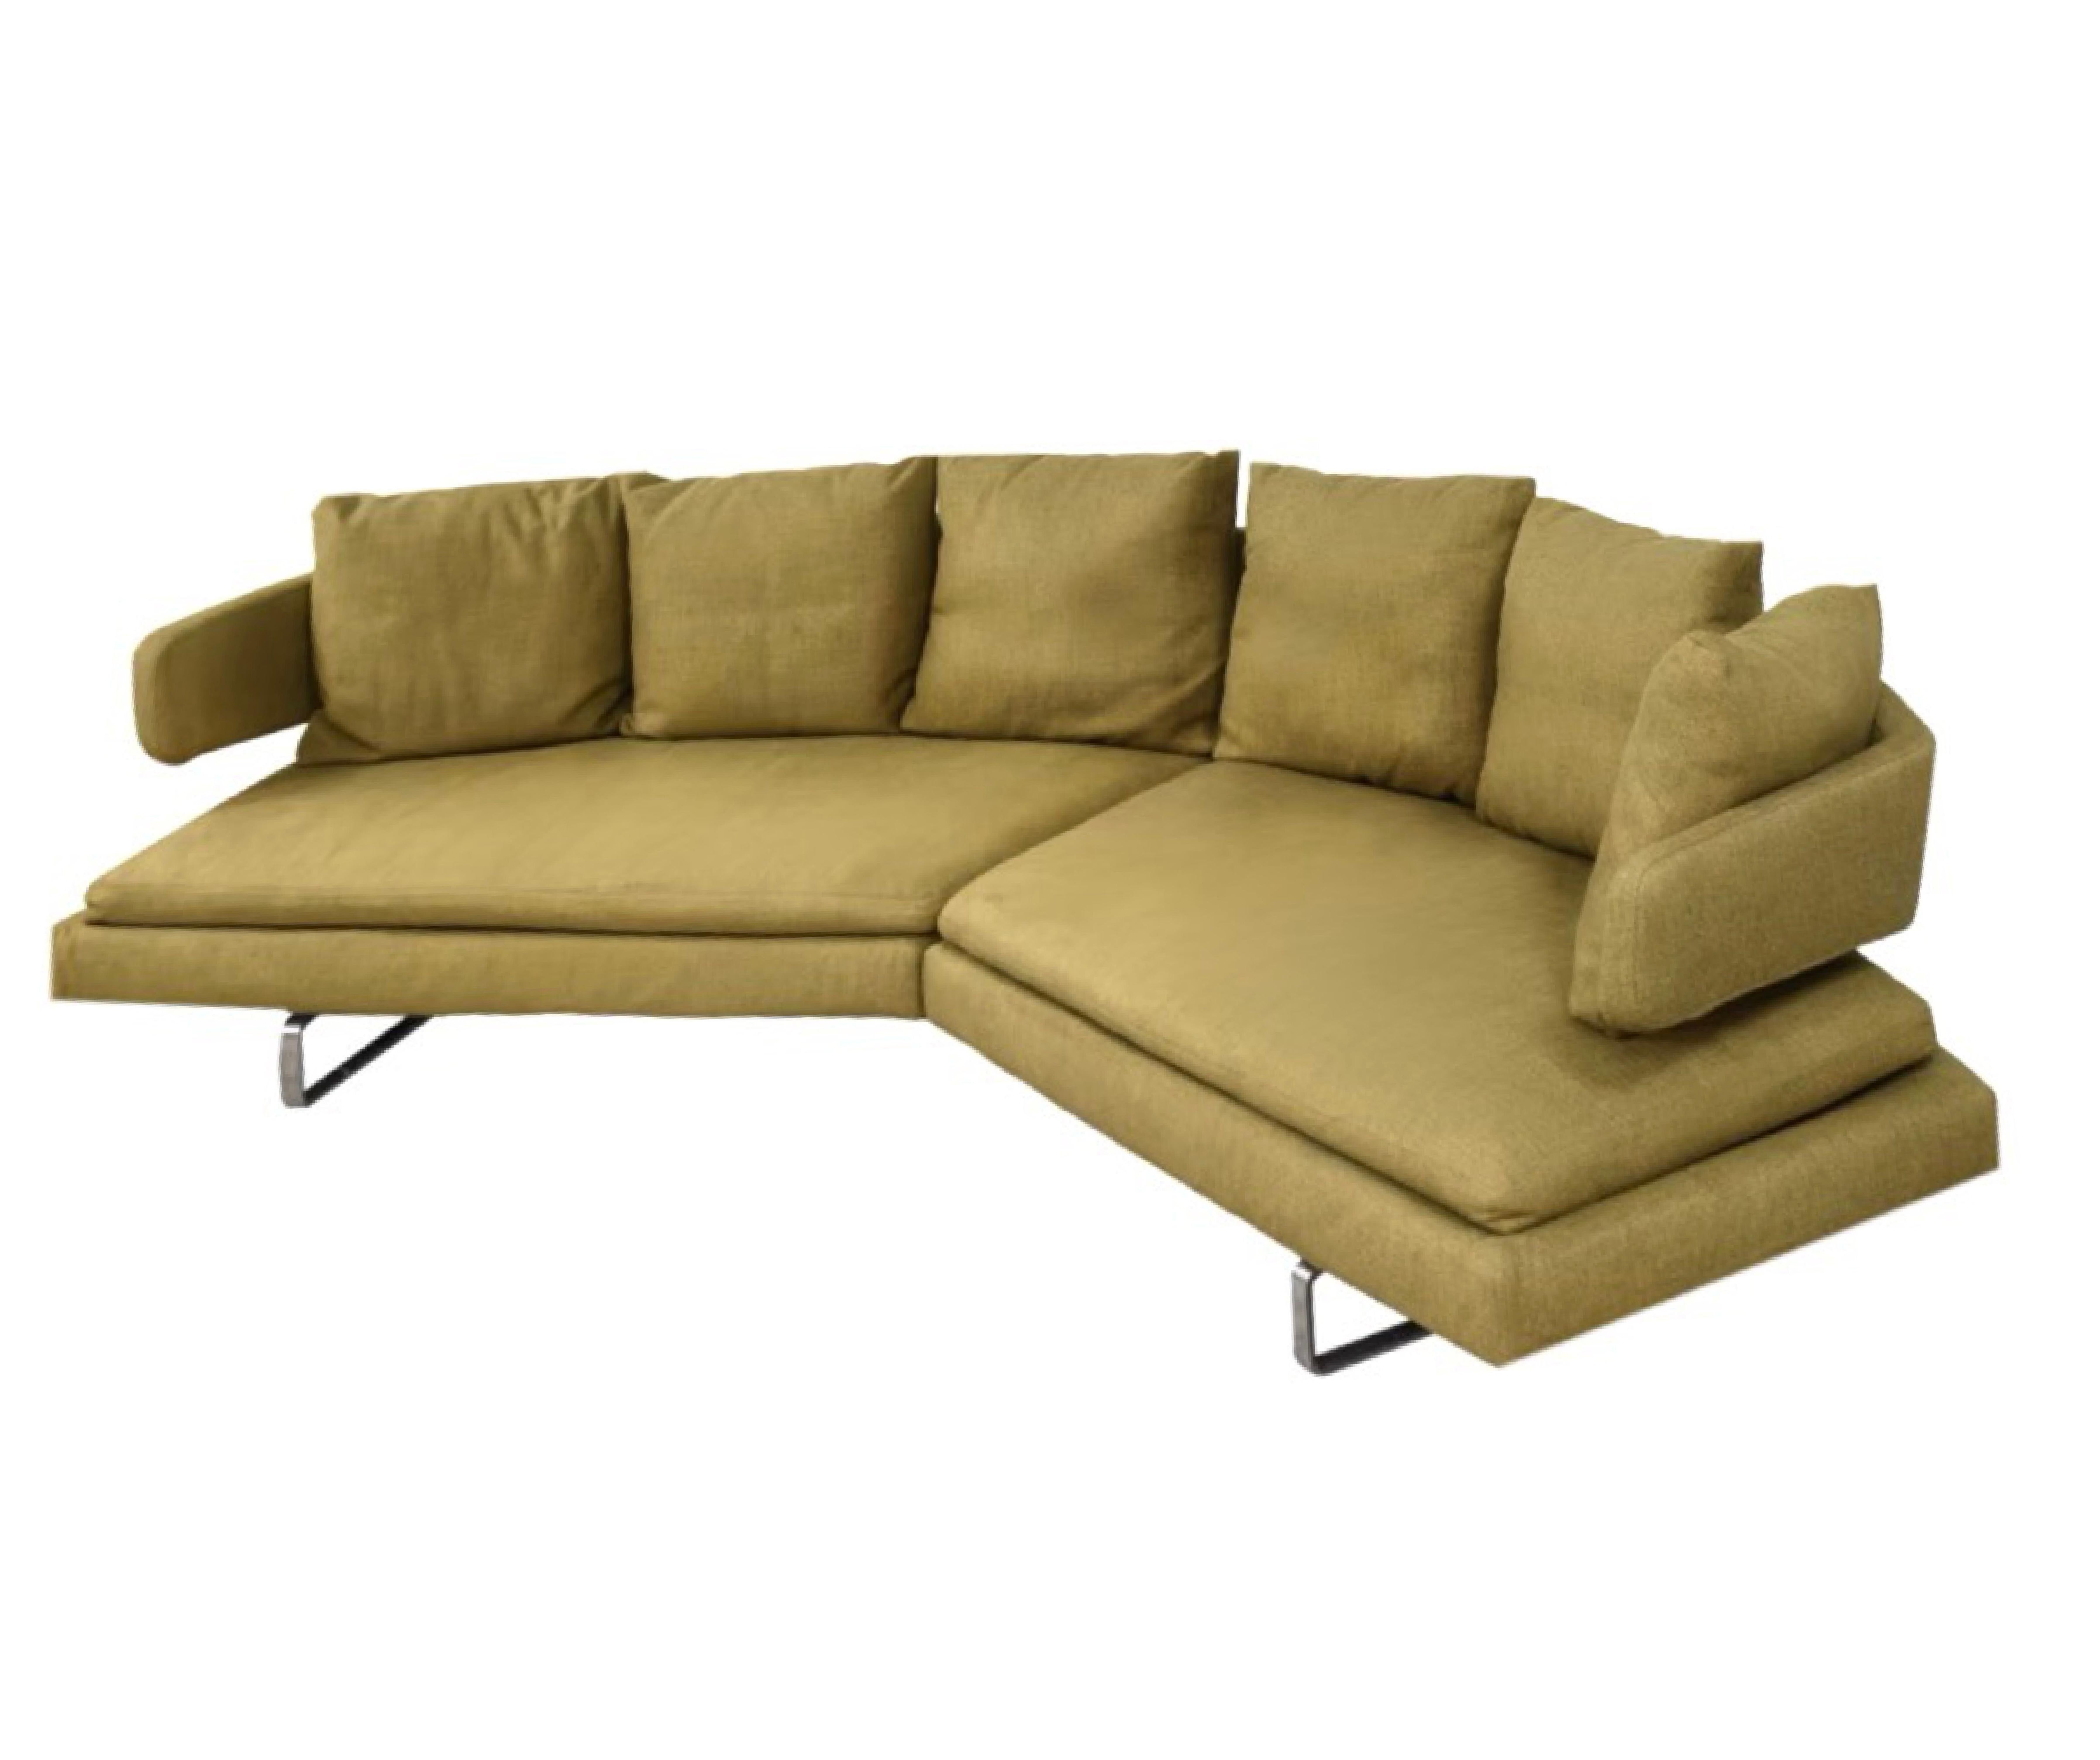 Arne Sofa A320_C, Green, Antonio Citterio for B&B Italia, Italy, 2010. Labeled with date of manufacture.  Comes with 6 back pillows (See photos 2 & 3). We believe this is the Elmas 450 wool blend textile. 
Designed to create the setting for leisure